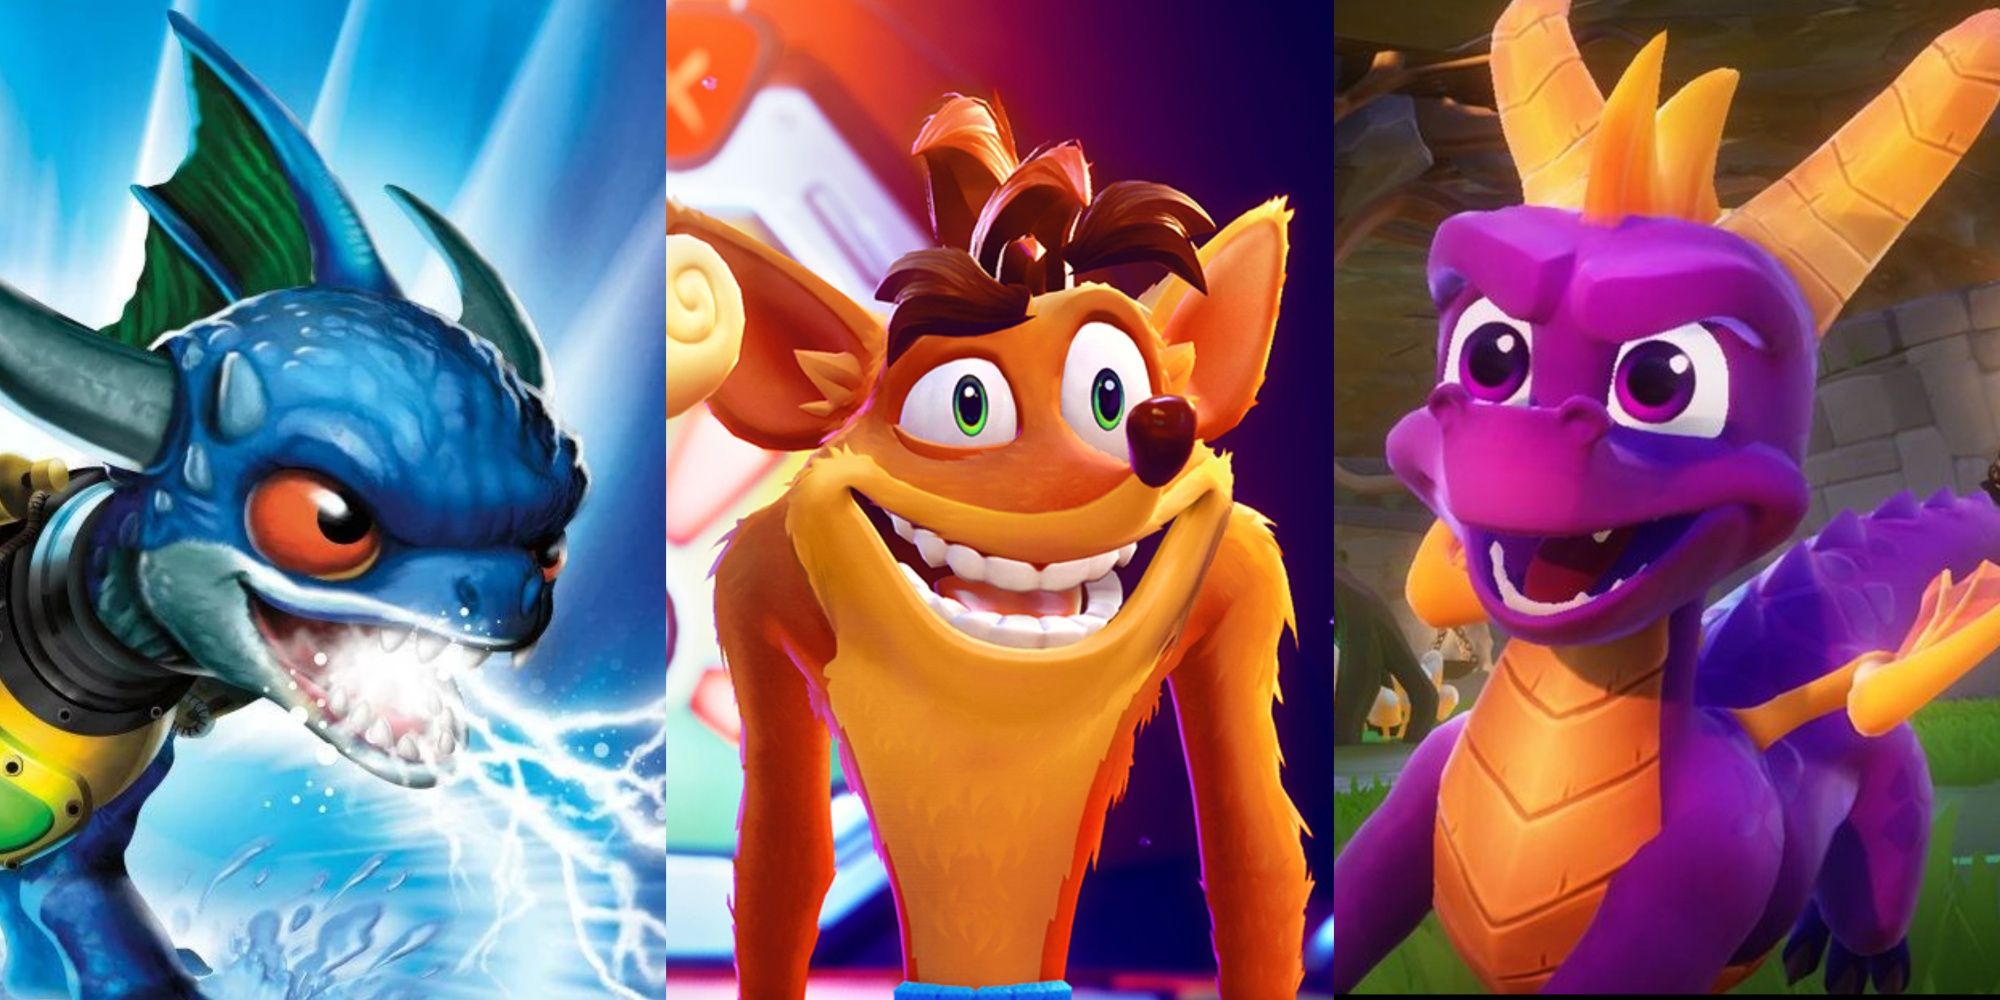 A Skylander, Crash Bandicoot, and Spyro the Dragon stand side-by-side in a collage